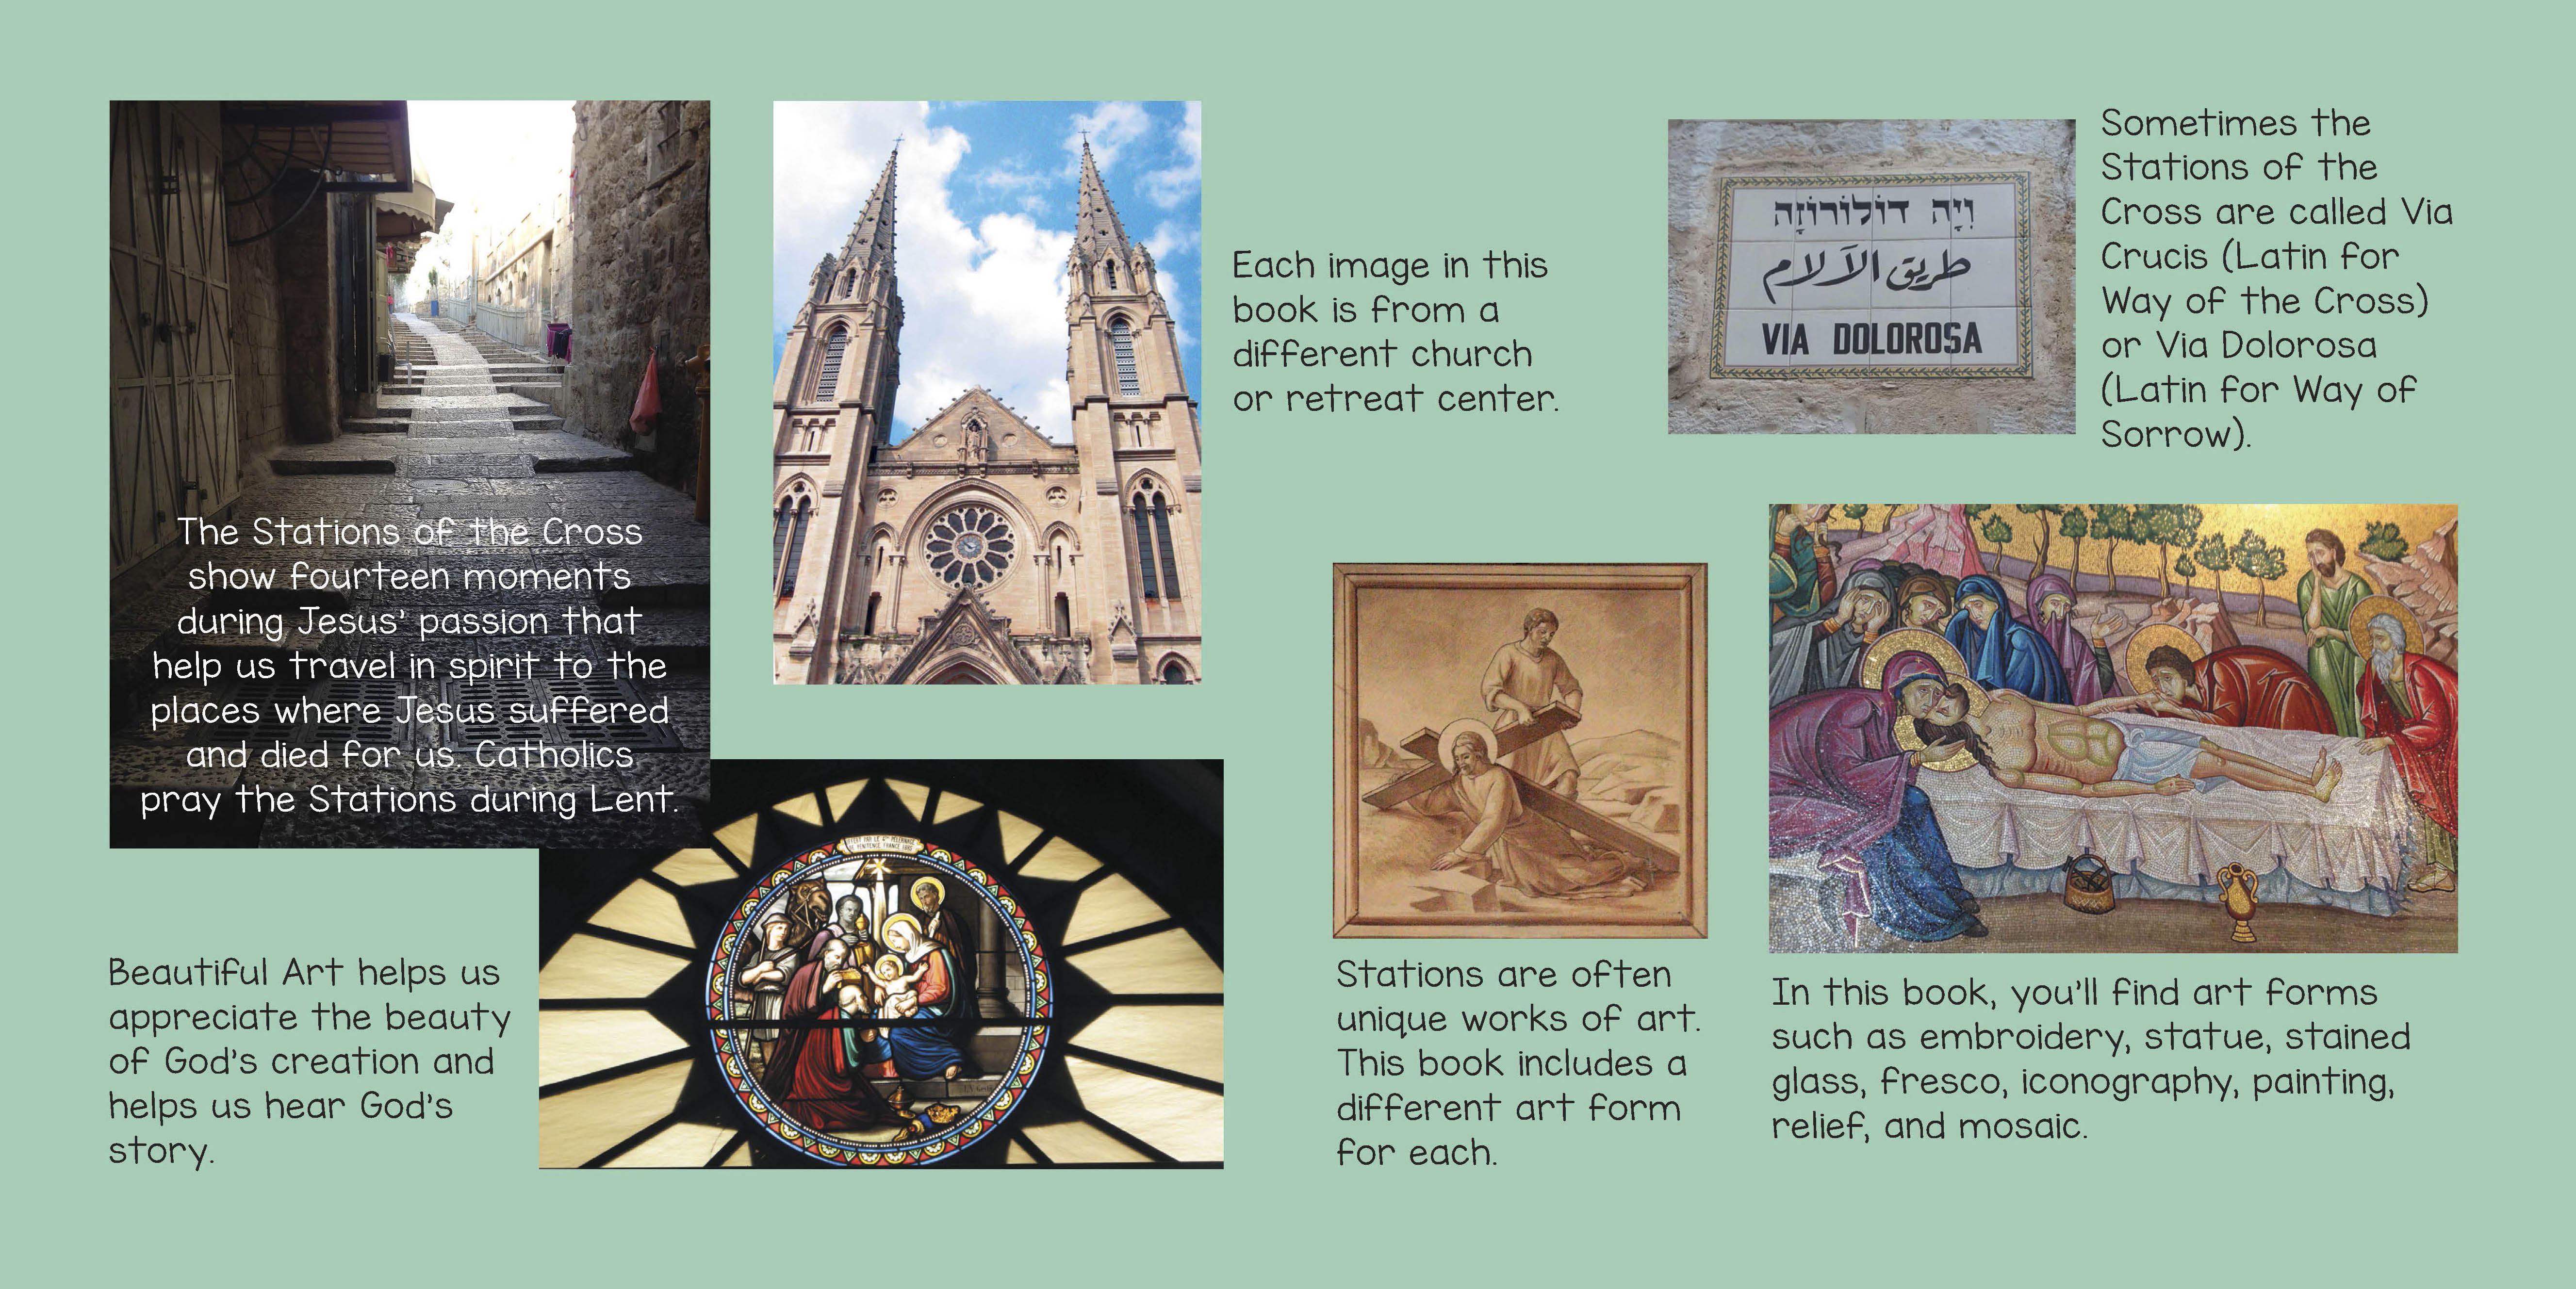 Stations of the Cross have a long history in the Catholic Church. 